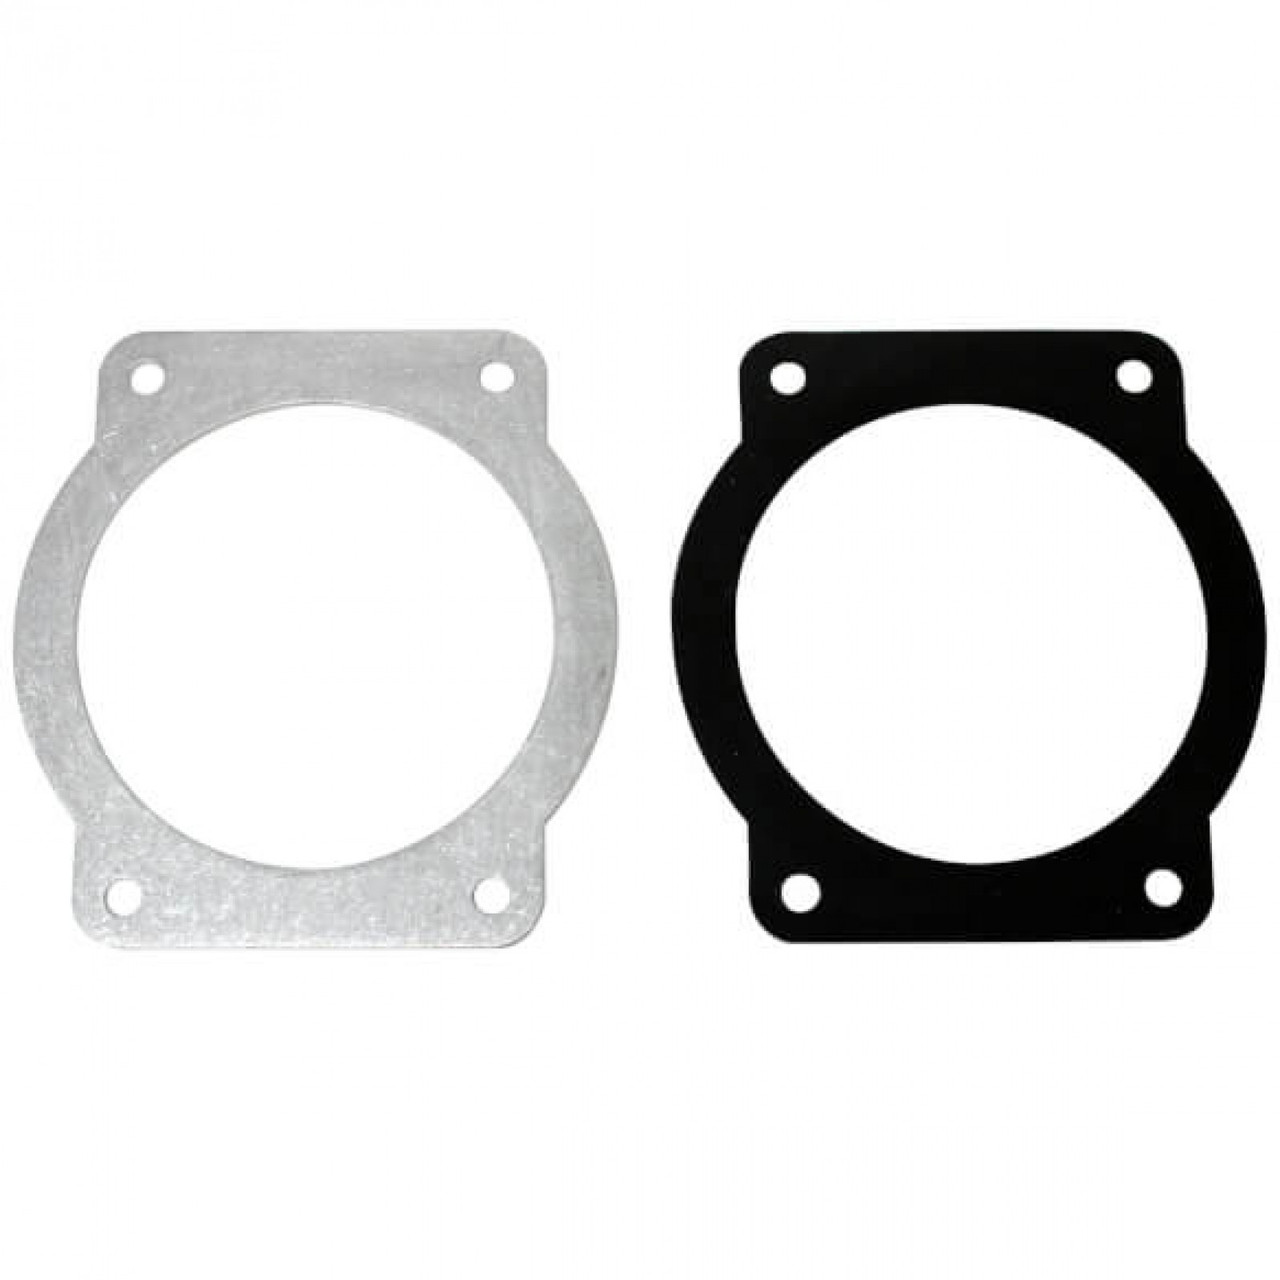 Throttlebody Sealing Plate Kit For Atomic Airforce For Pn 2701 And Pn 2702 (MSD-32704)